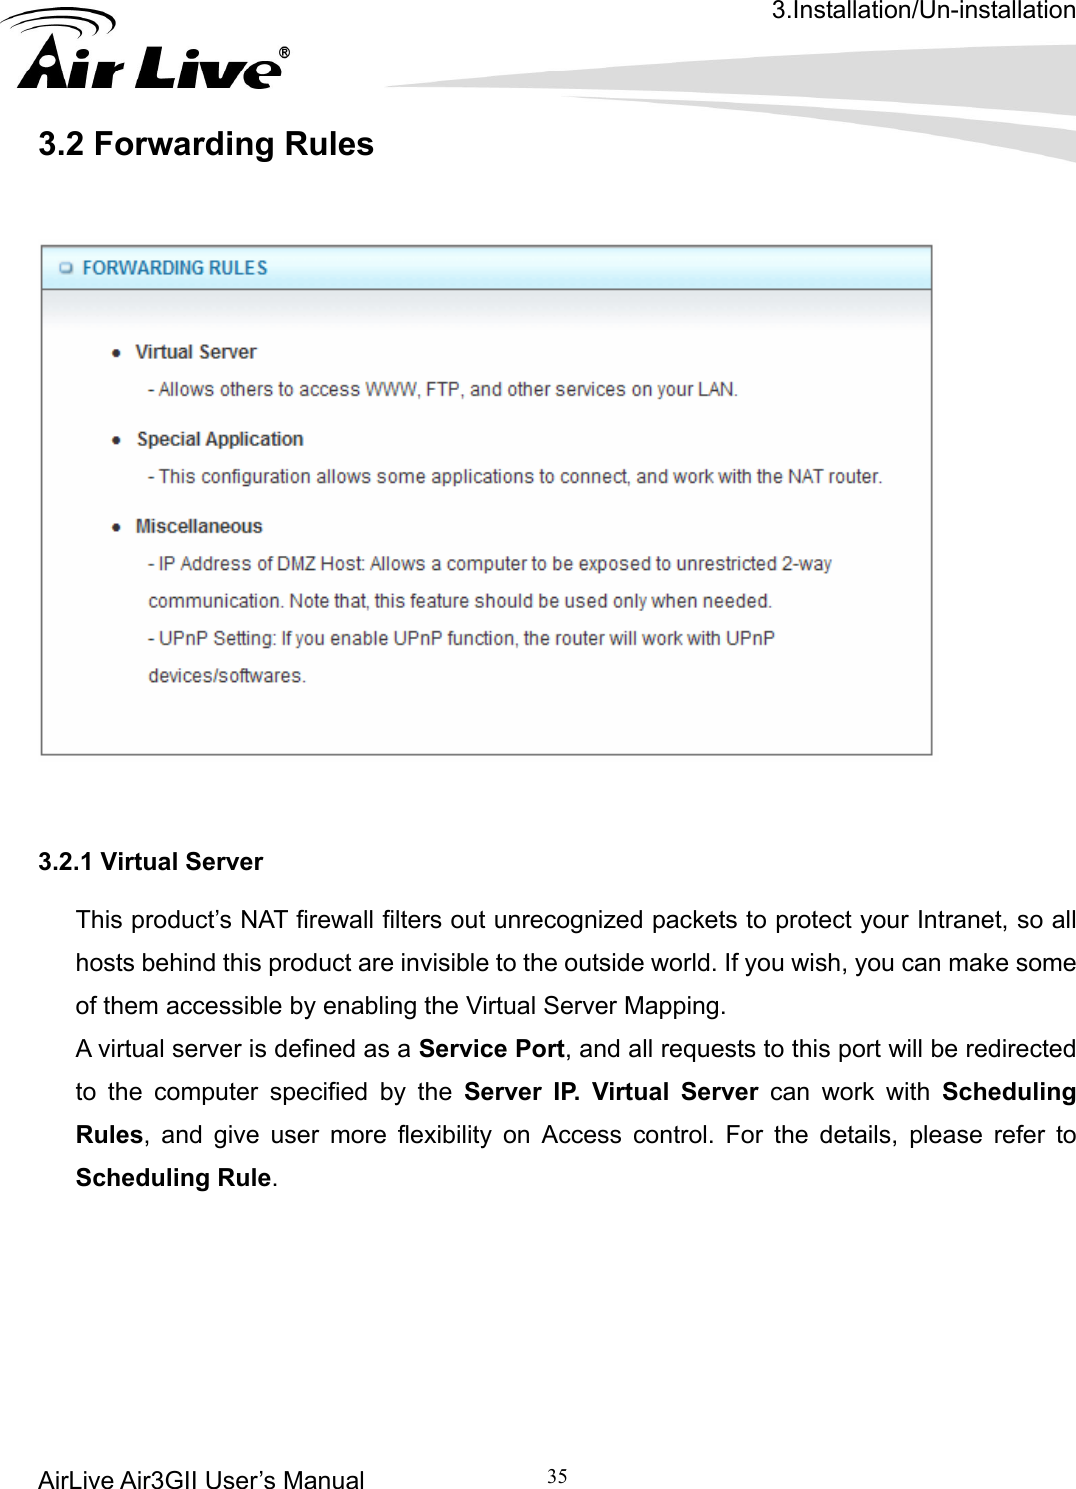 3.Installation/Un-installation AirLive Air3GII User’s Manual 35   .2 Forwarding Rules    3    3.2.1 Virtual Server This product’s NAT firewall filters out unrecognized packets to protect your Intranet, so all hosts behind this product are invisible to the outside world. If you wish, you can make some of them accessible by enabling the Virtual Server Mapping. A virtual server is defined as a Service Port, and all requests to this port will be redirected to the computer specified by the Server IP. Virtual Server can work with Scheduling Rules, and give user more flexibility on Access control. For the details, please refer to Scheduling Rule.        